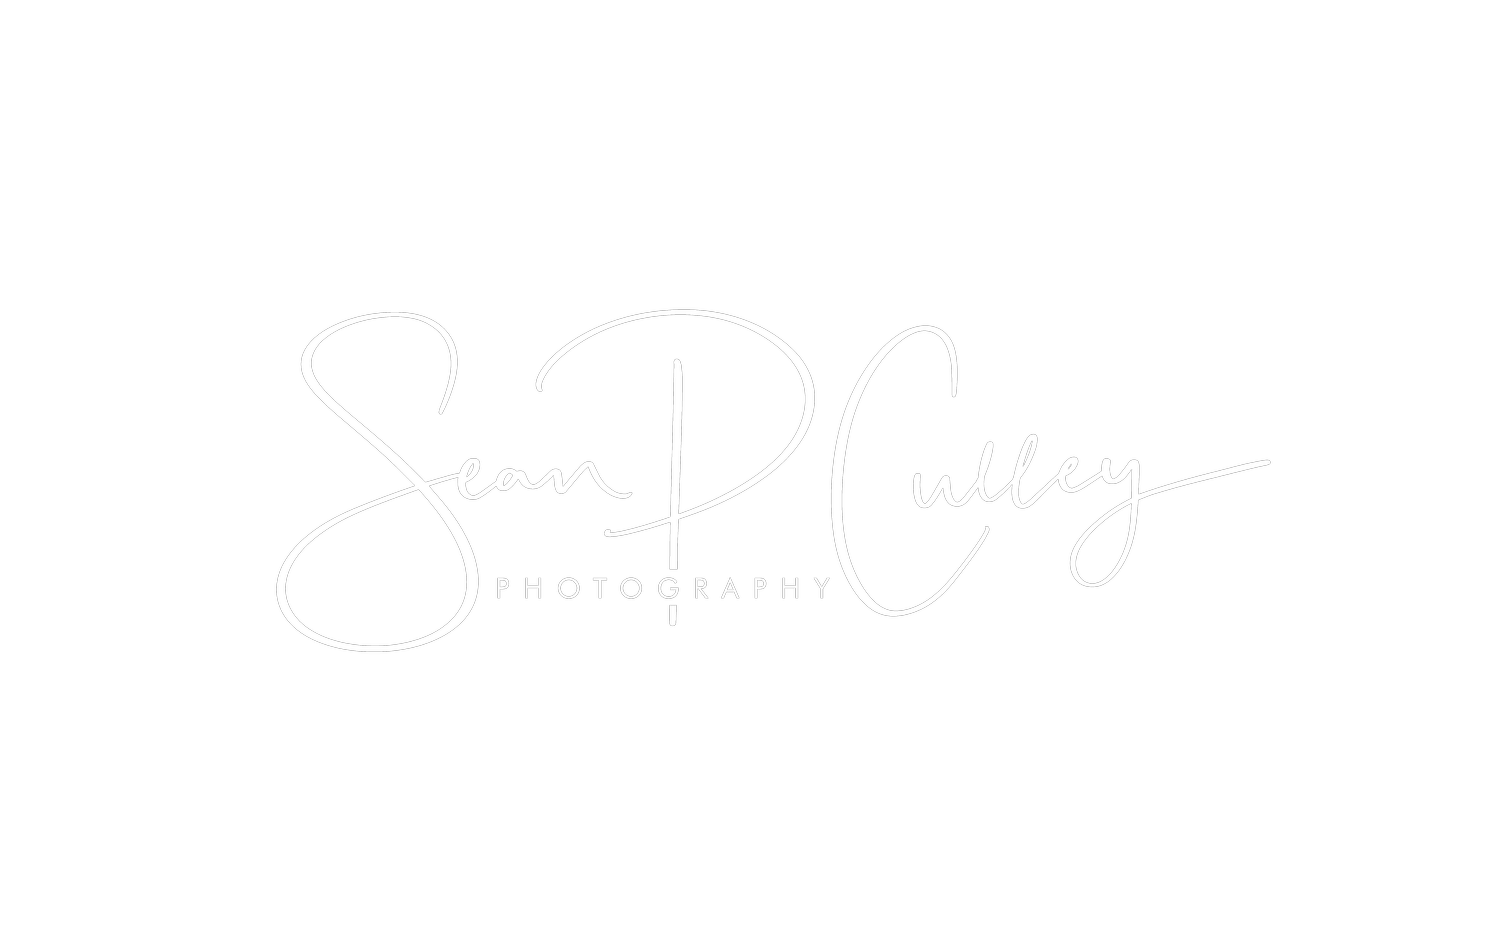 Sean P Culley Photography